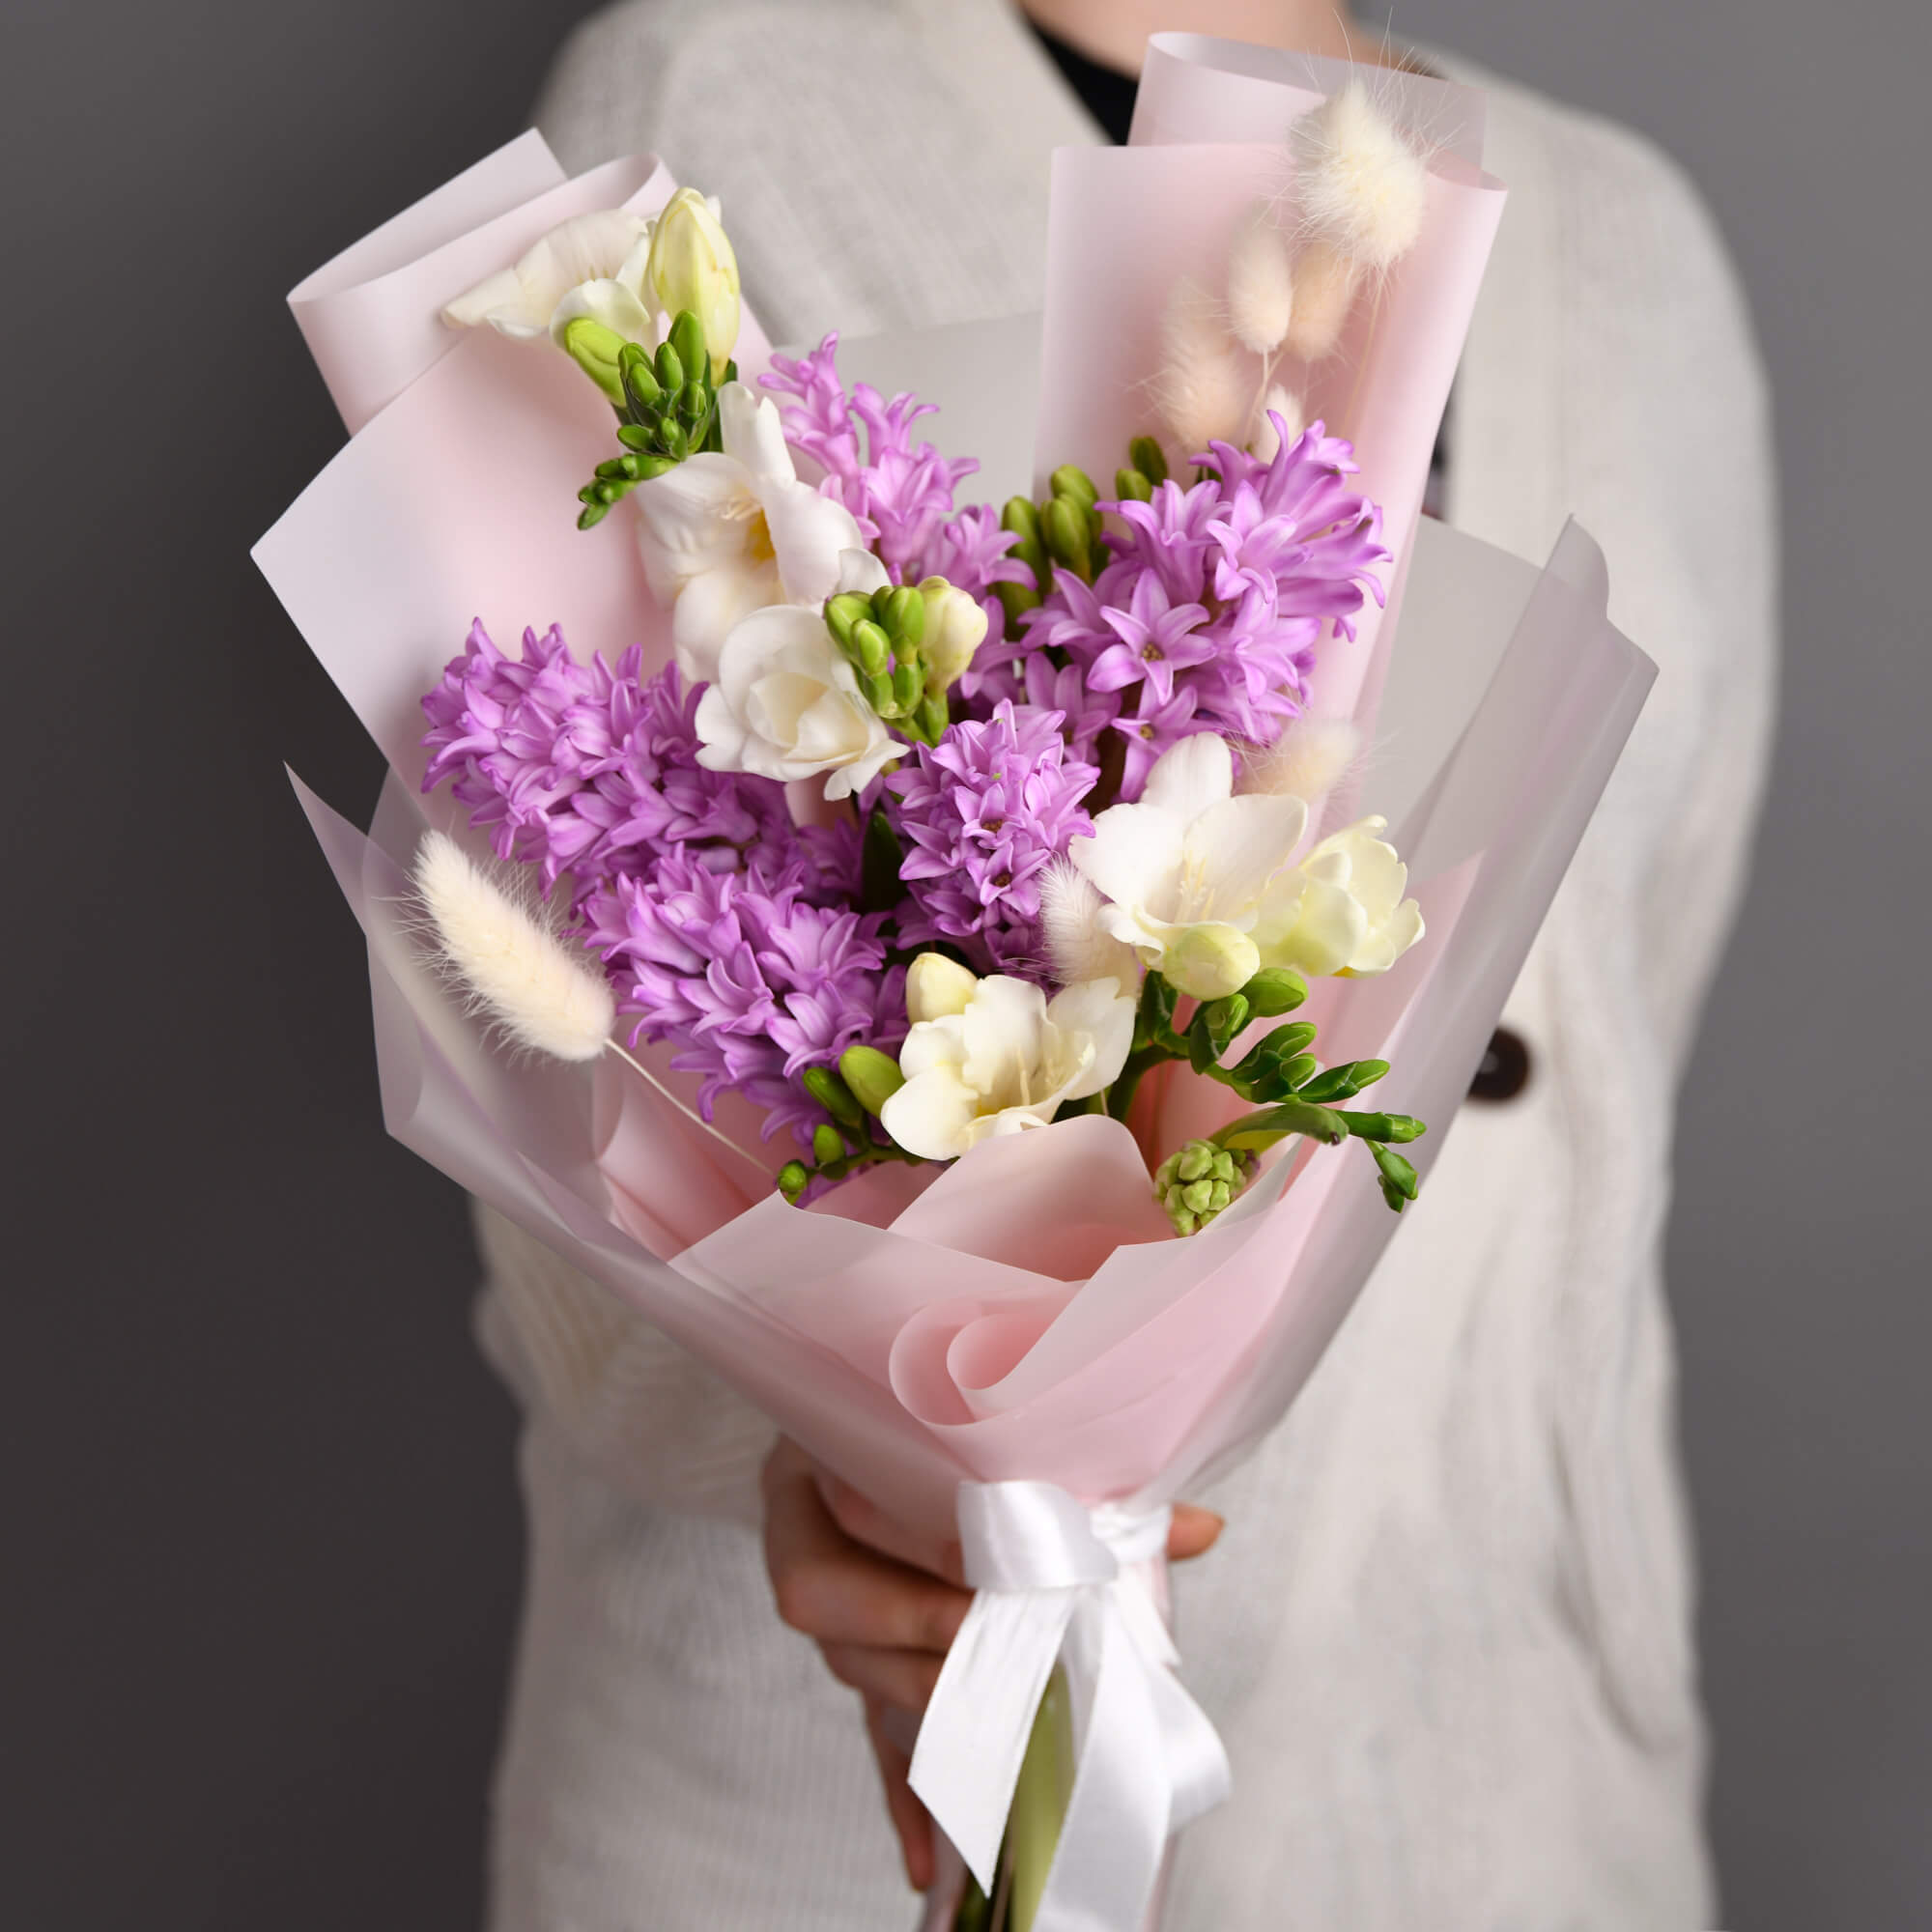 Bouquet with hyacinths and white freesias